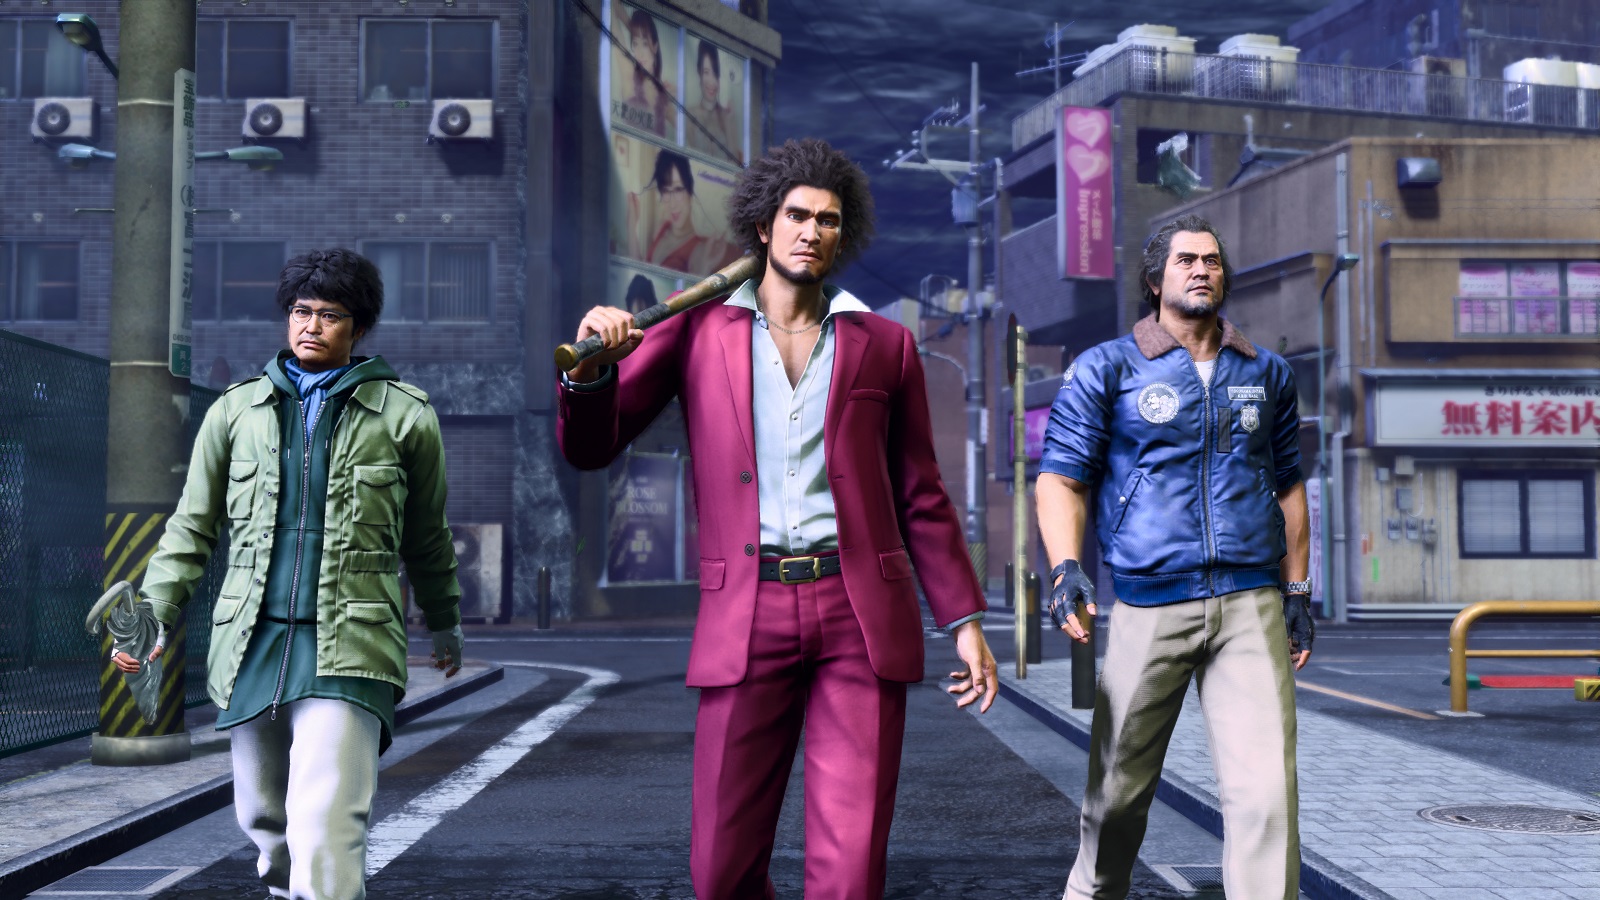 Like A Dragon: Infinite Wealth review: thank goodness for Yakuza